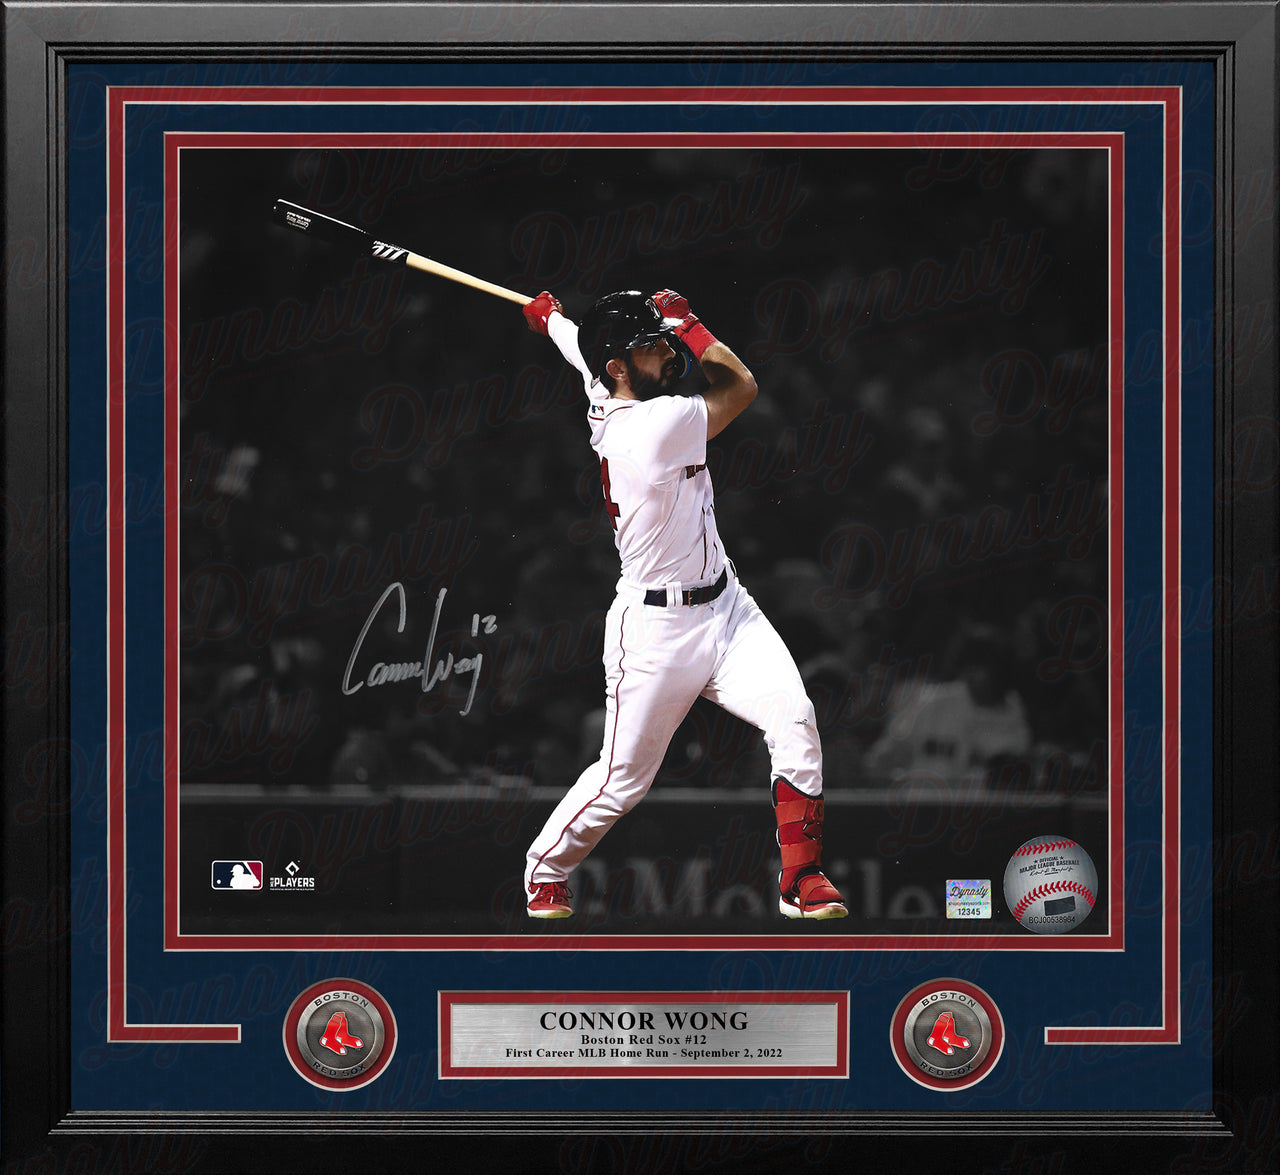 Connor Wong 1st Home Run Boston Red Sox Autographed 11" x 14" Framed Spotlight Baseball Photo